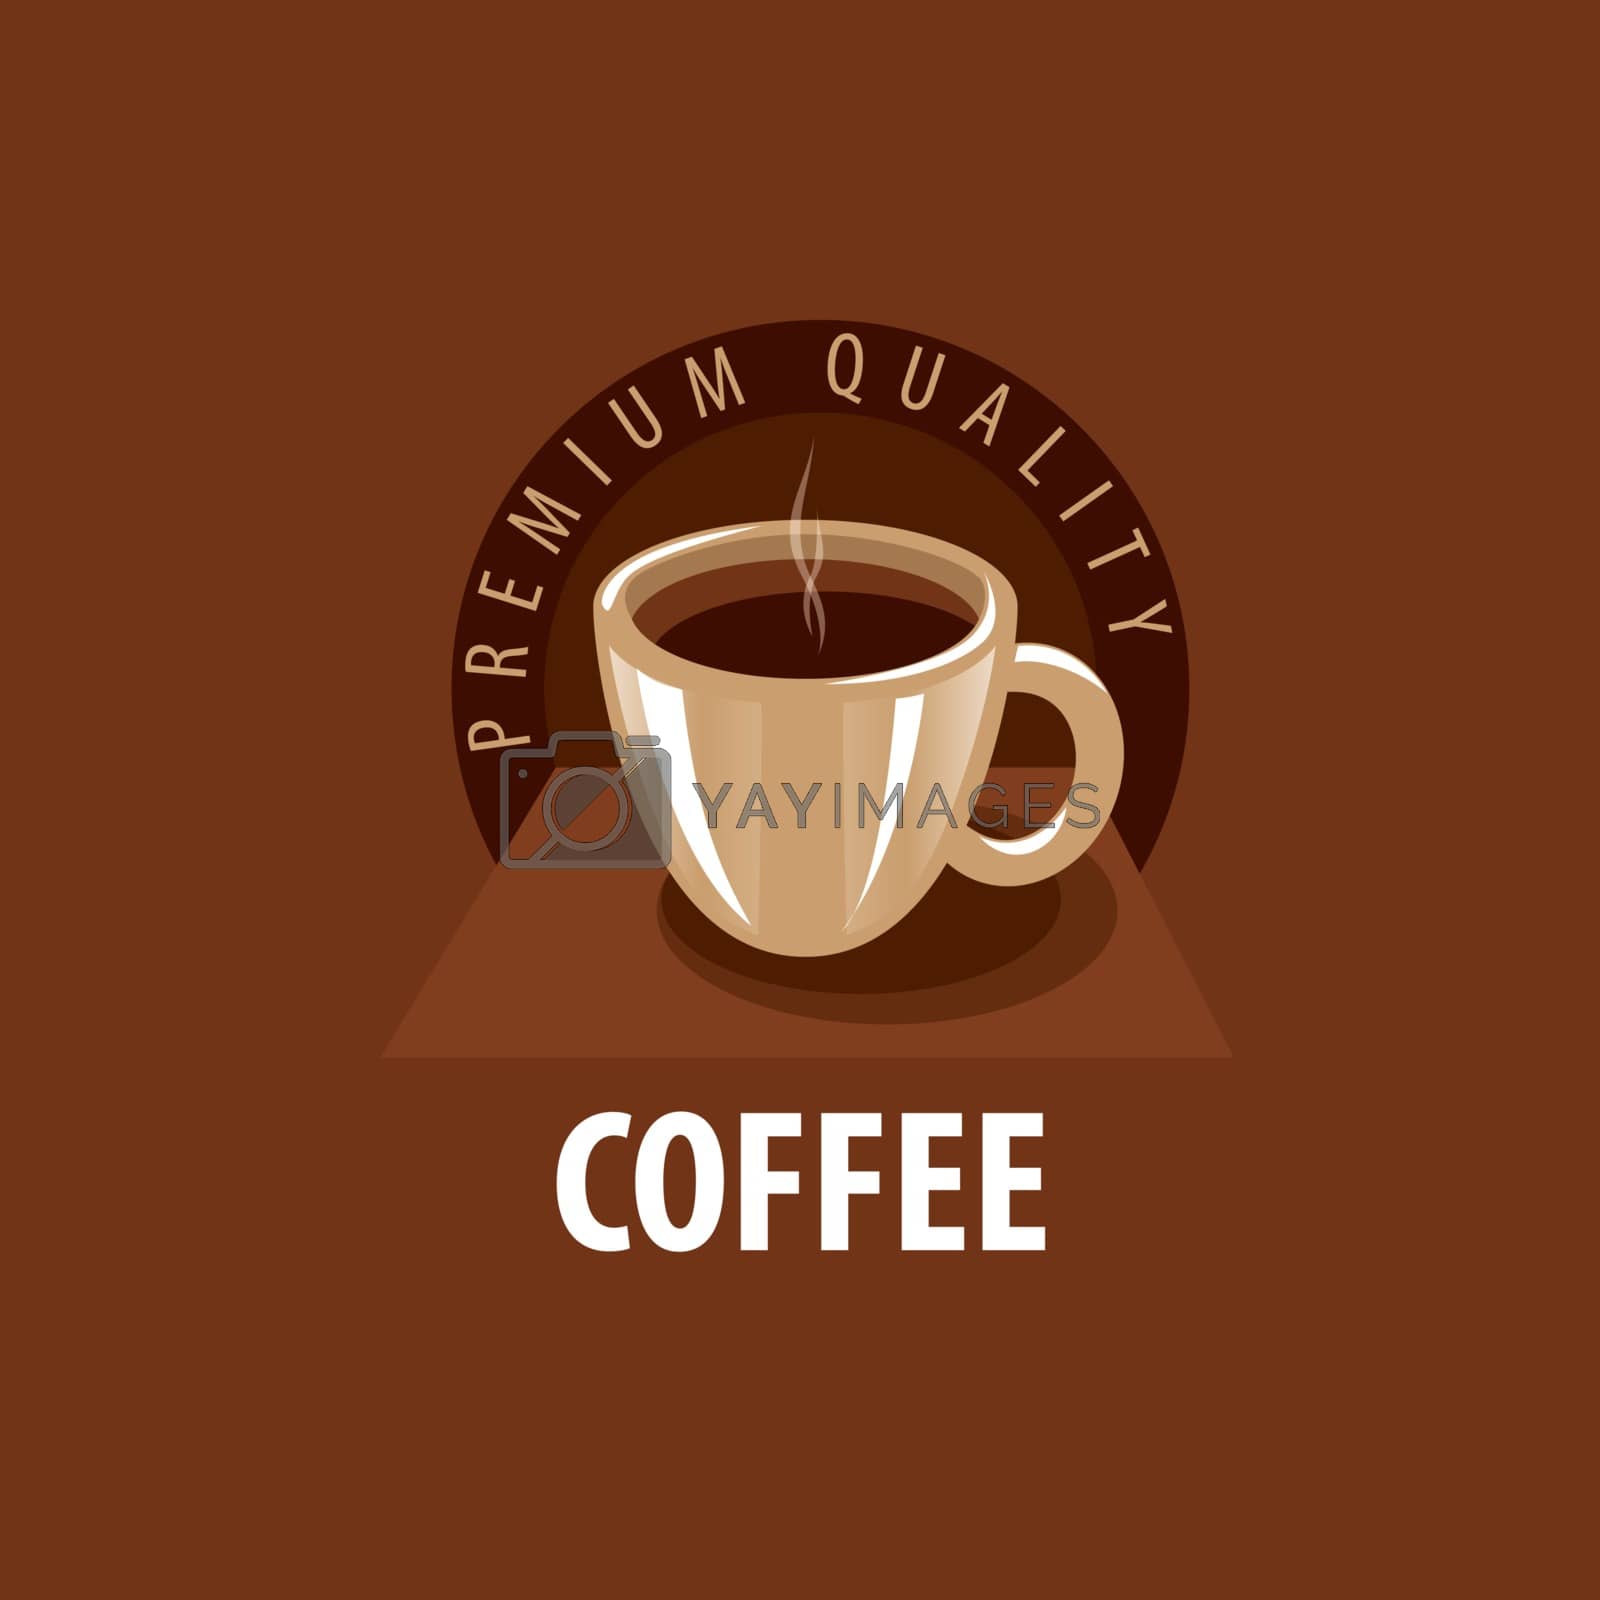 Royalty free image of vector logo for coffee by butenkow